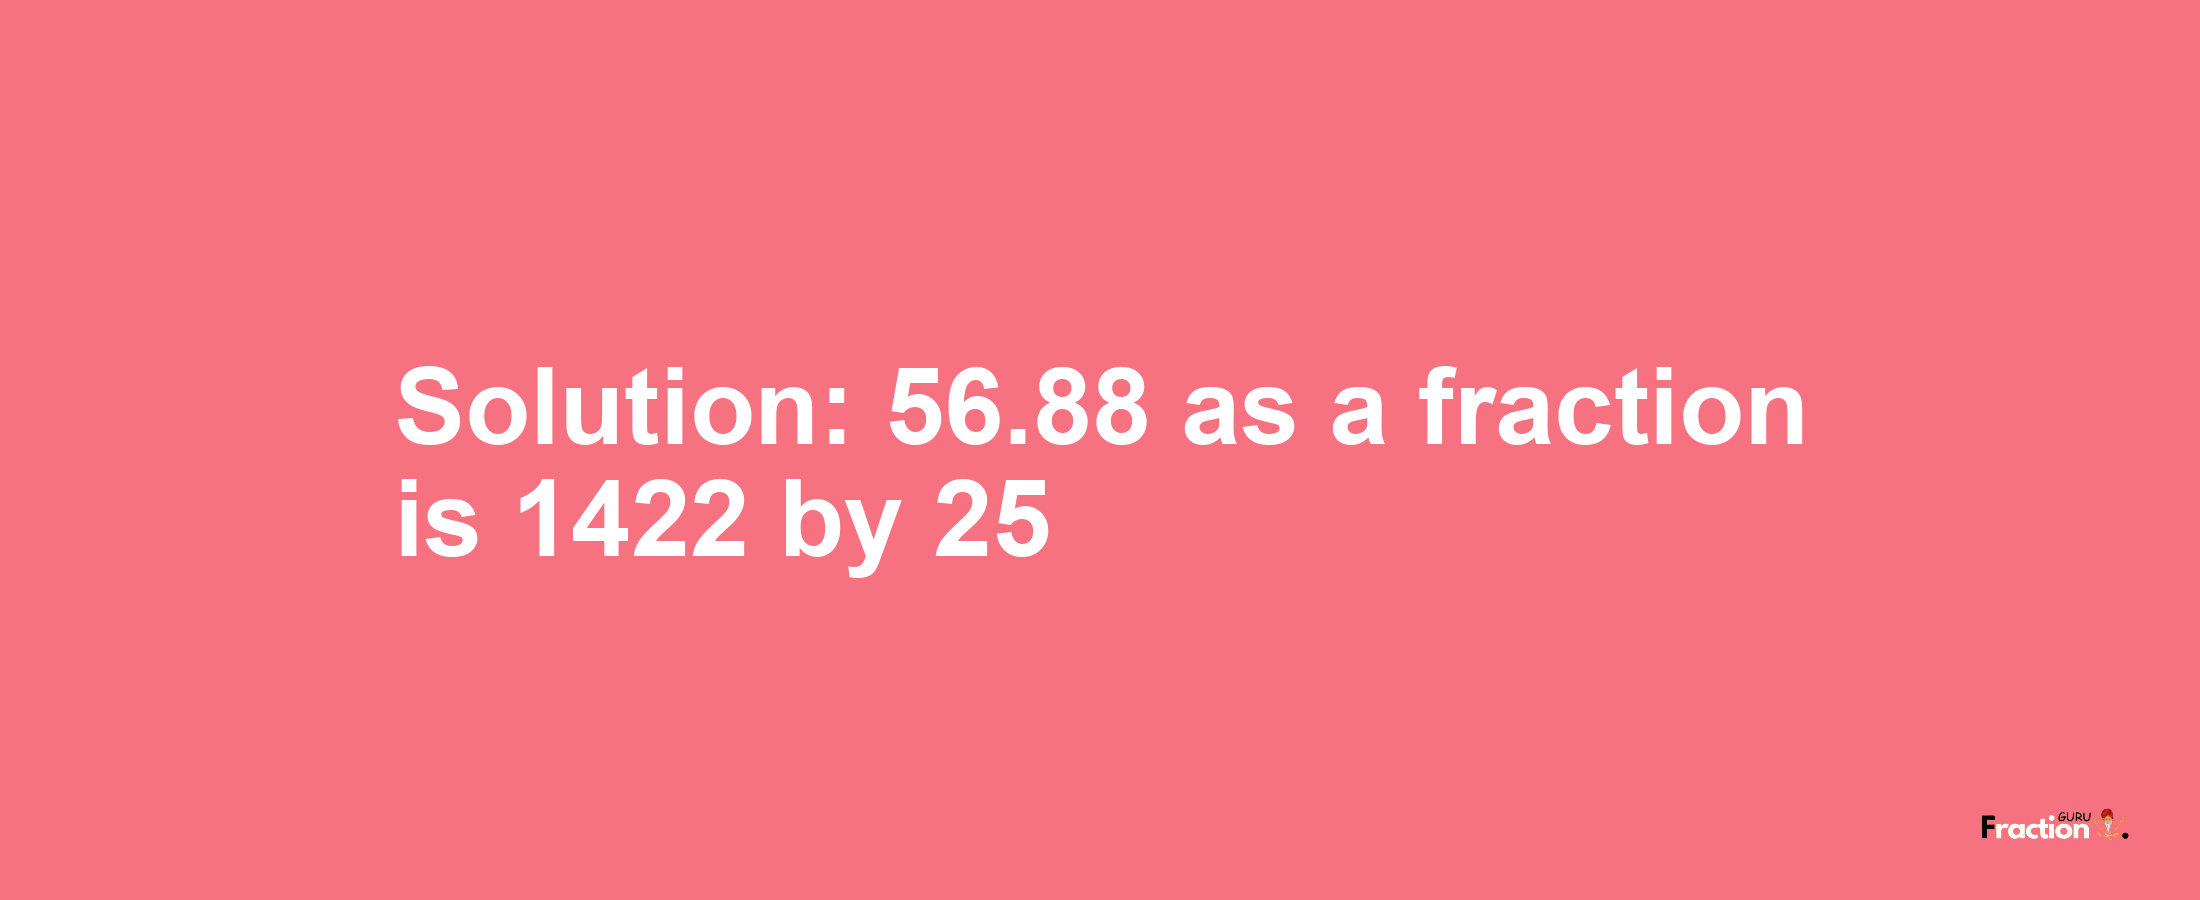 Solution:56.88 as a fraction is 1422/25